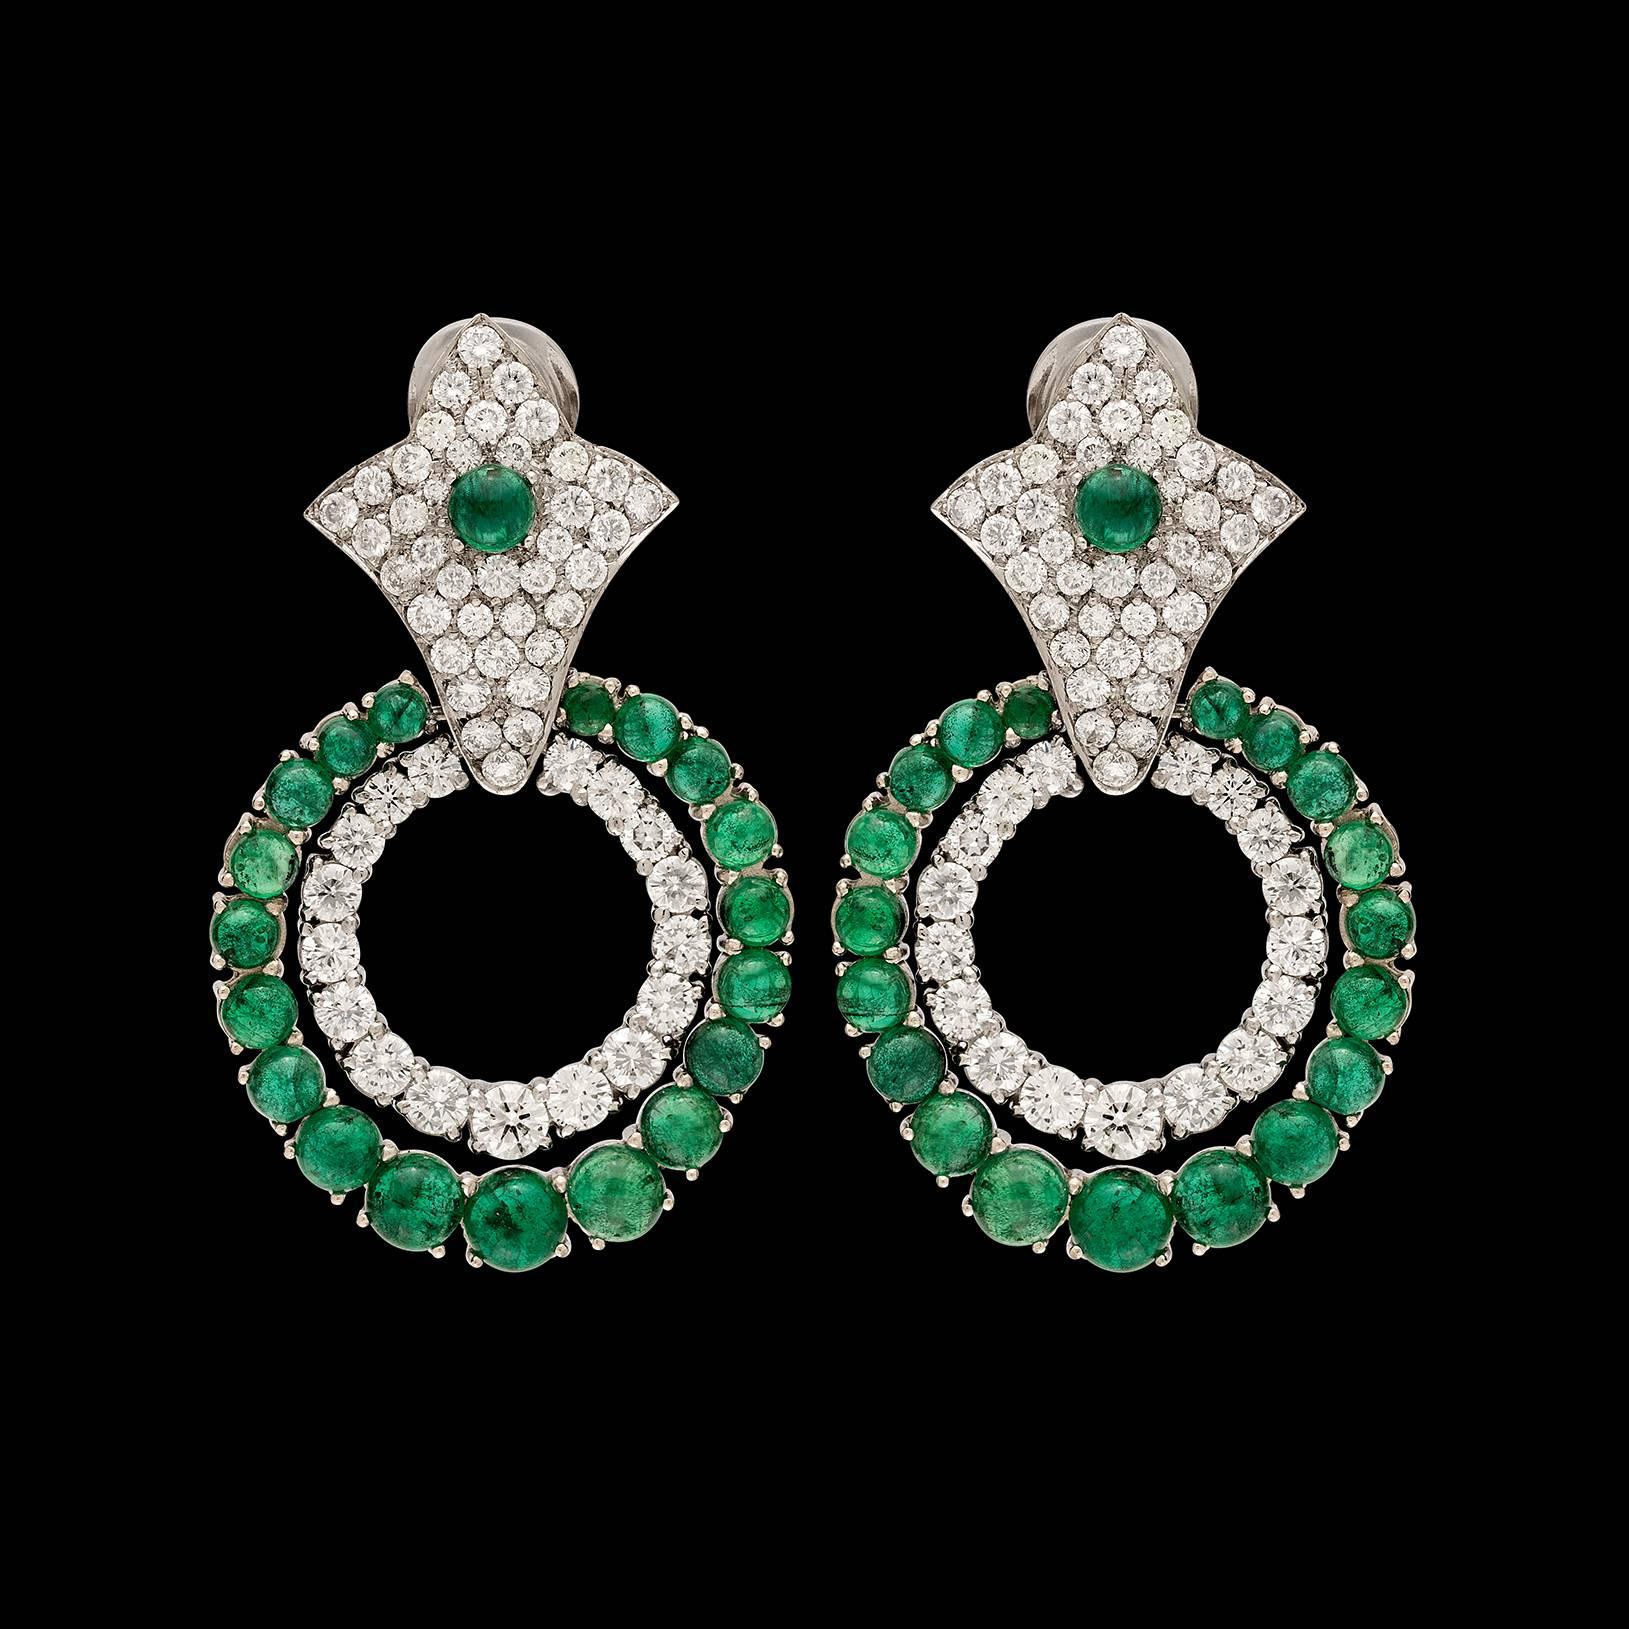 Fabulous 18k white gold doorknocker earrings are designed with shield-shaped tops with doorknocker circles, set throughout with 100 round brilliant-cut diamonds and 40 cabochon-cut emeralds. Total diamond weight is 6.50 carats, with a total emerald